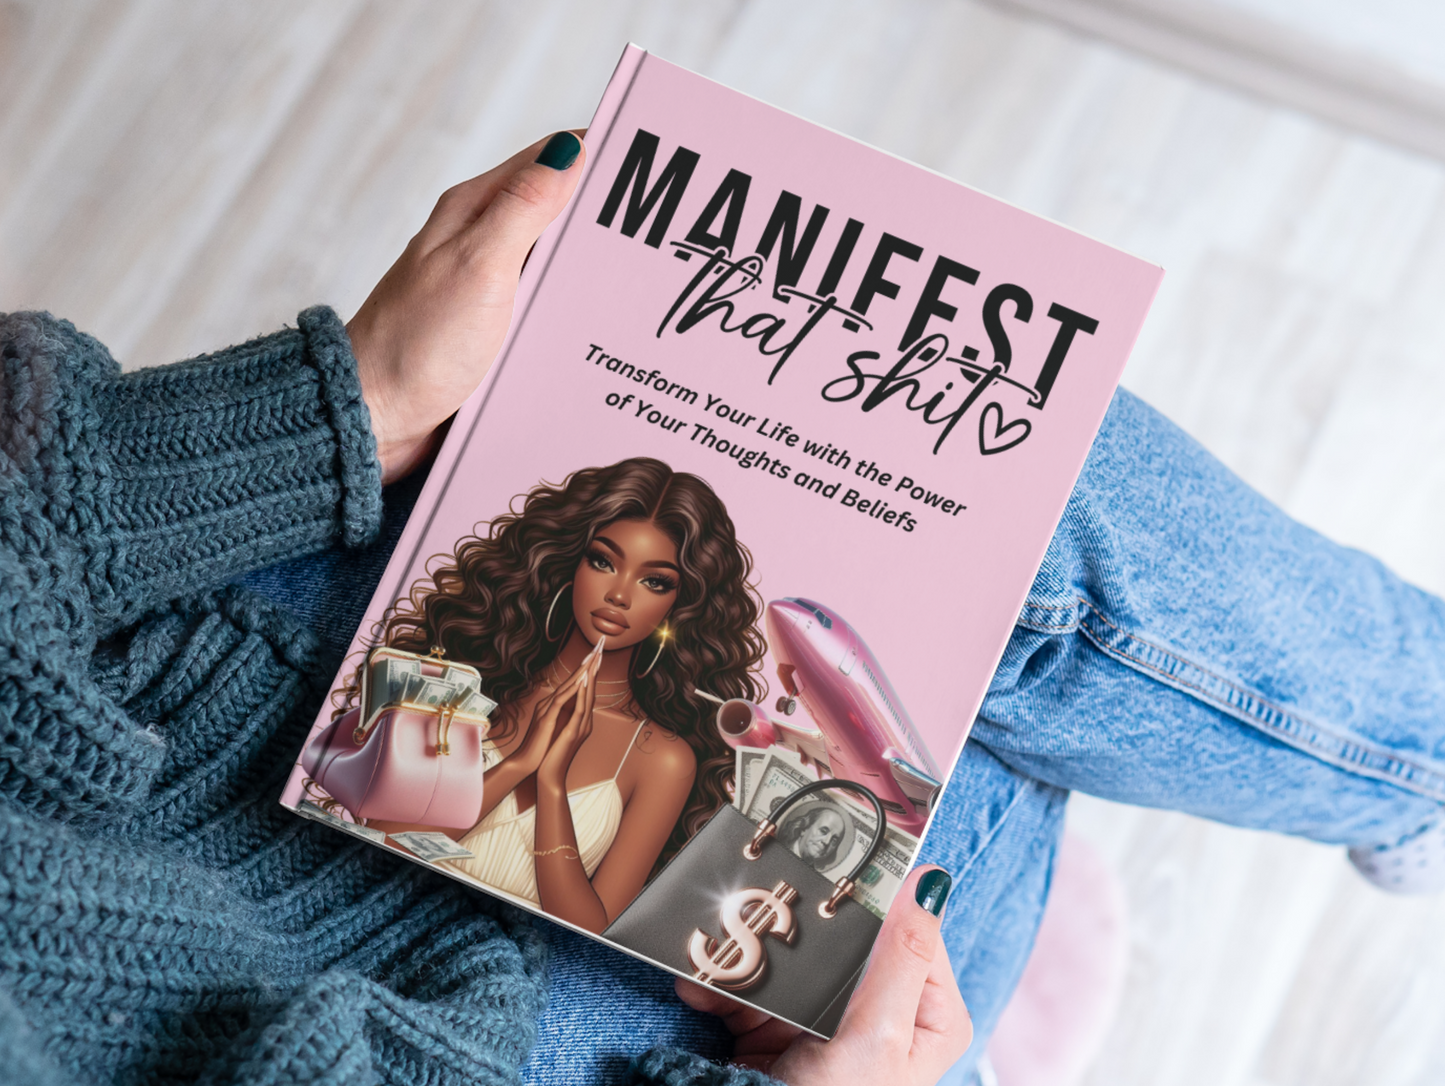 PLR How to Manifest that shit ebook